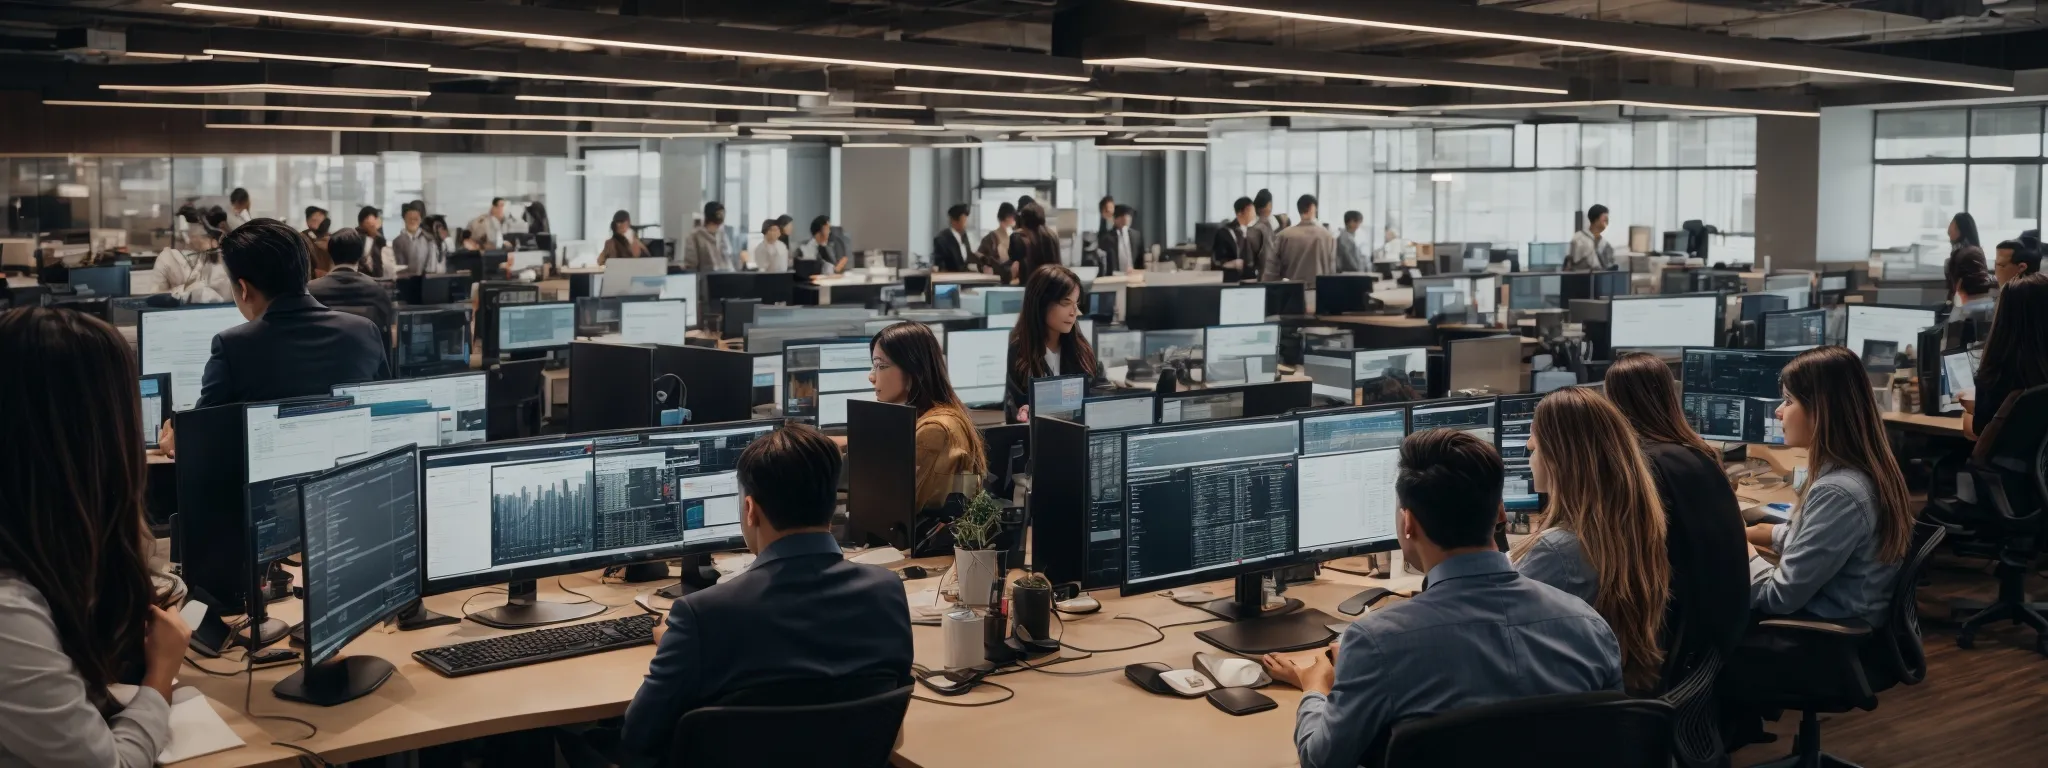 a bustling digital marketing team is brainstorming around a modern, vibrant office space, filled with monitors displaying social media analytics.